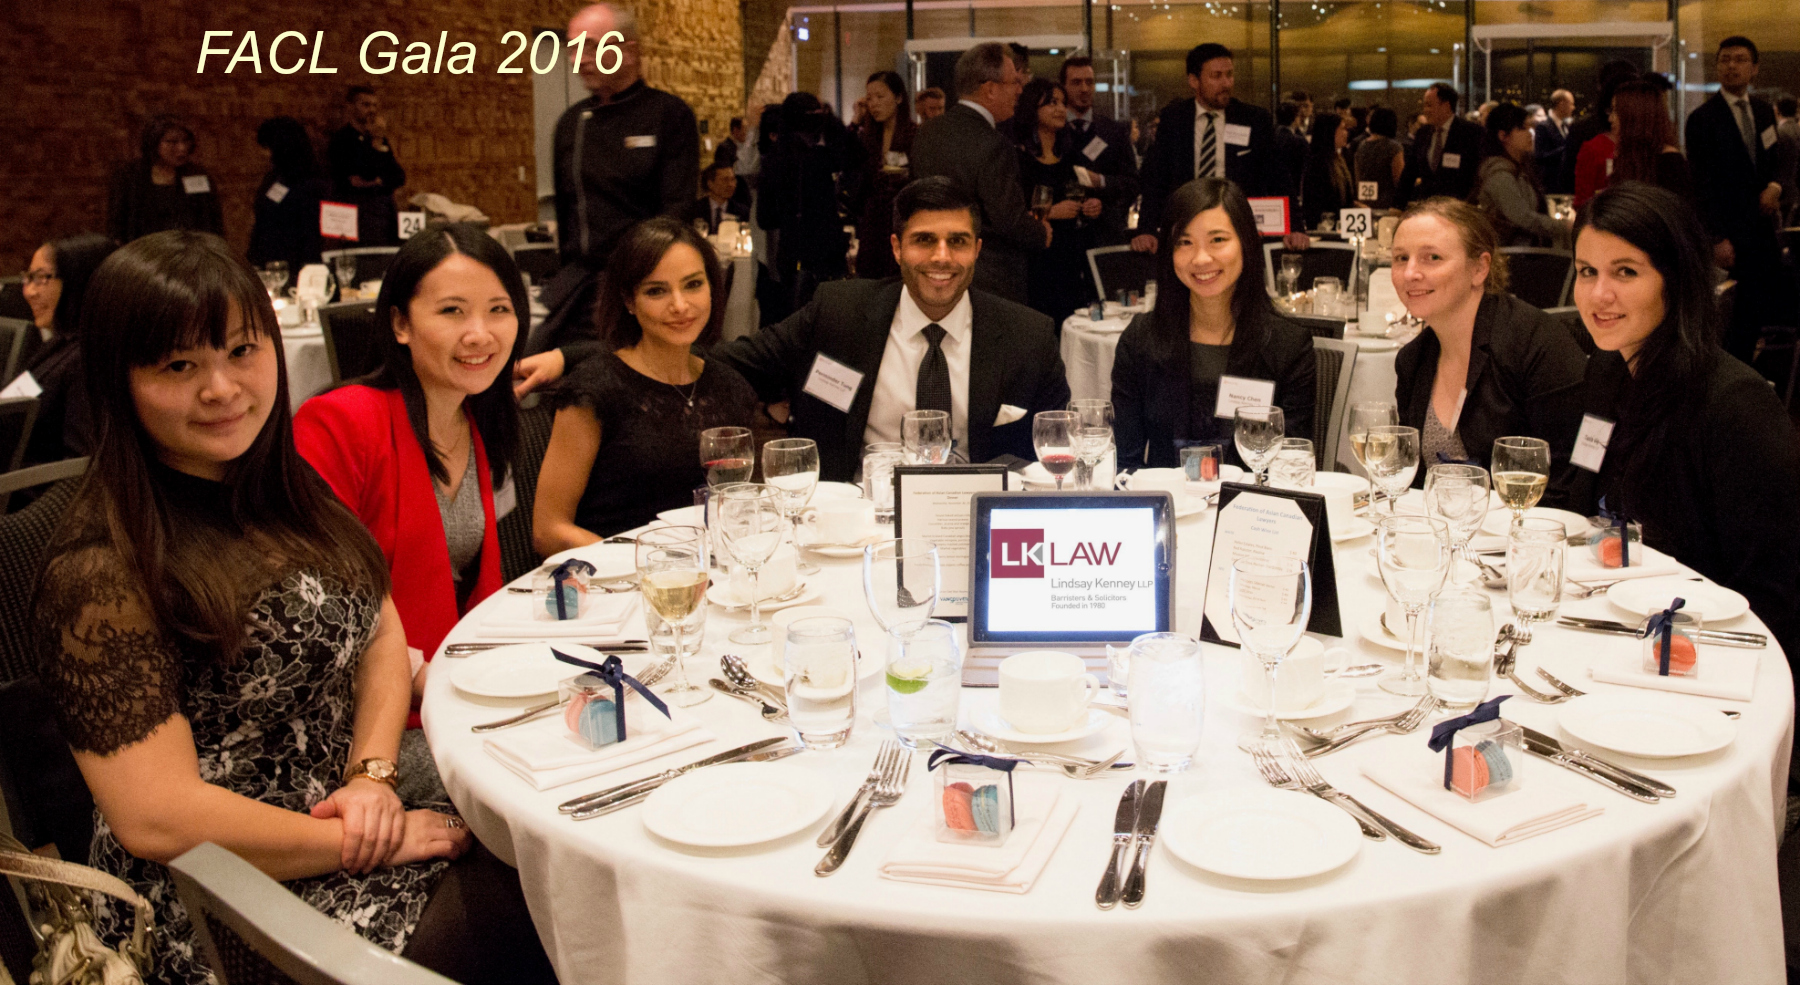 2016 FACL Gala - Lindsay Kenney LLP Table